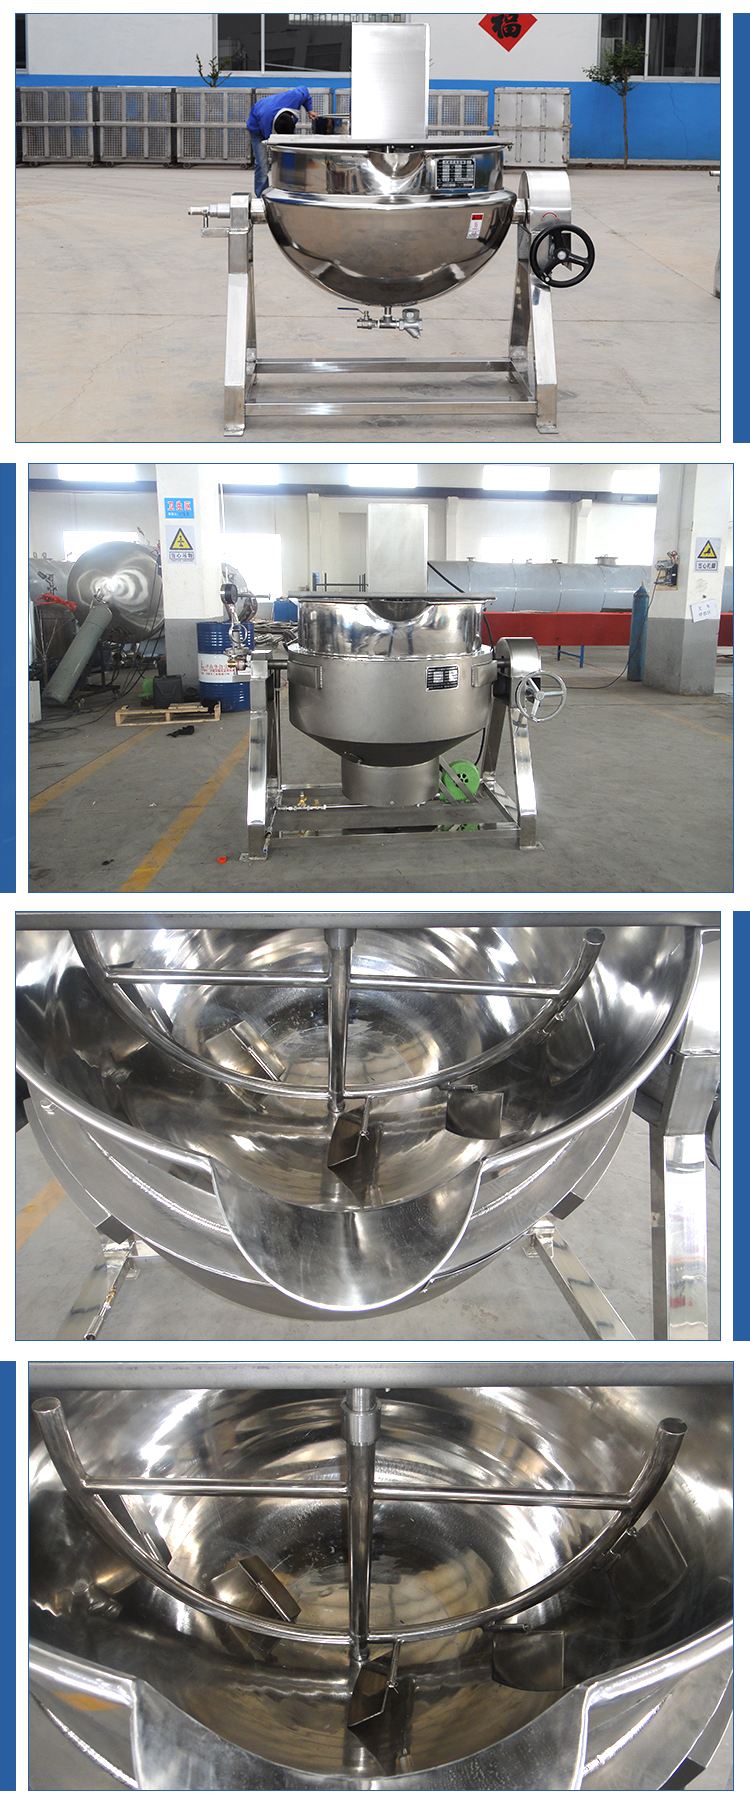 Industrial cooker Jam Peanut butter candy jacket kettle 200l jacket kettle steam jacketed kettle with agitator